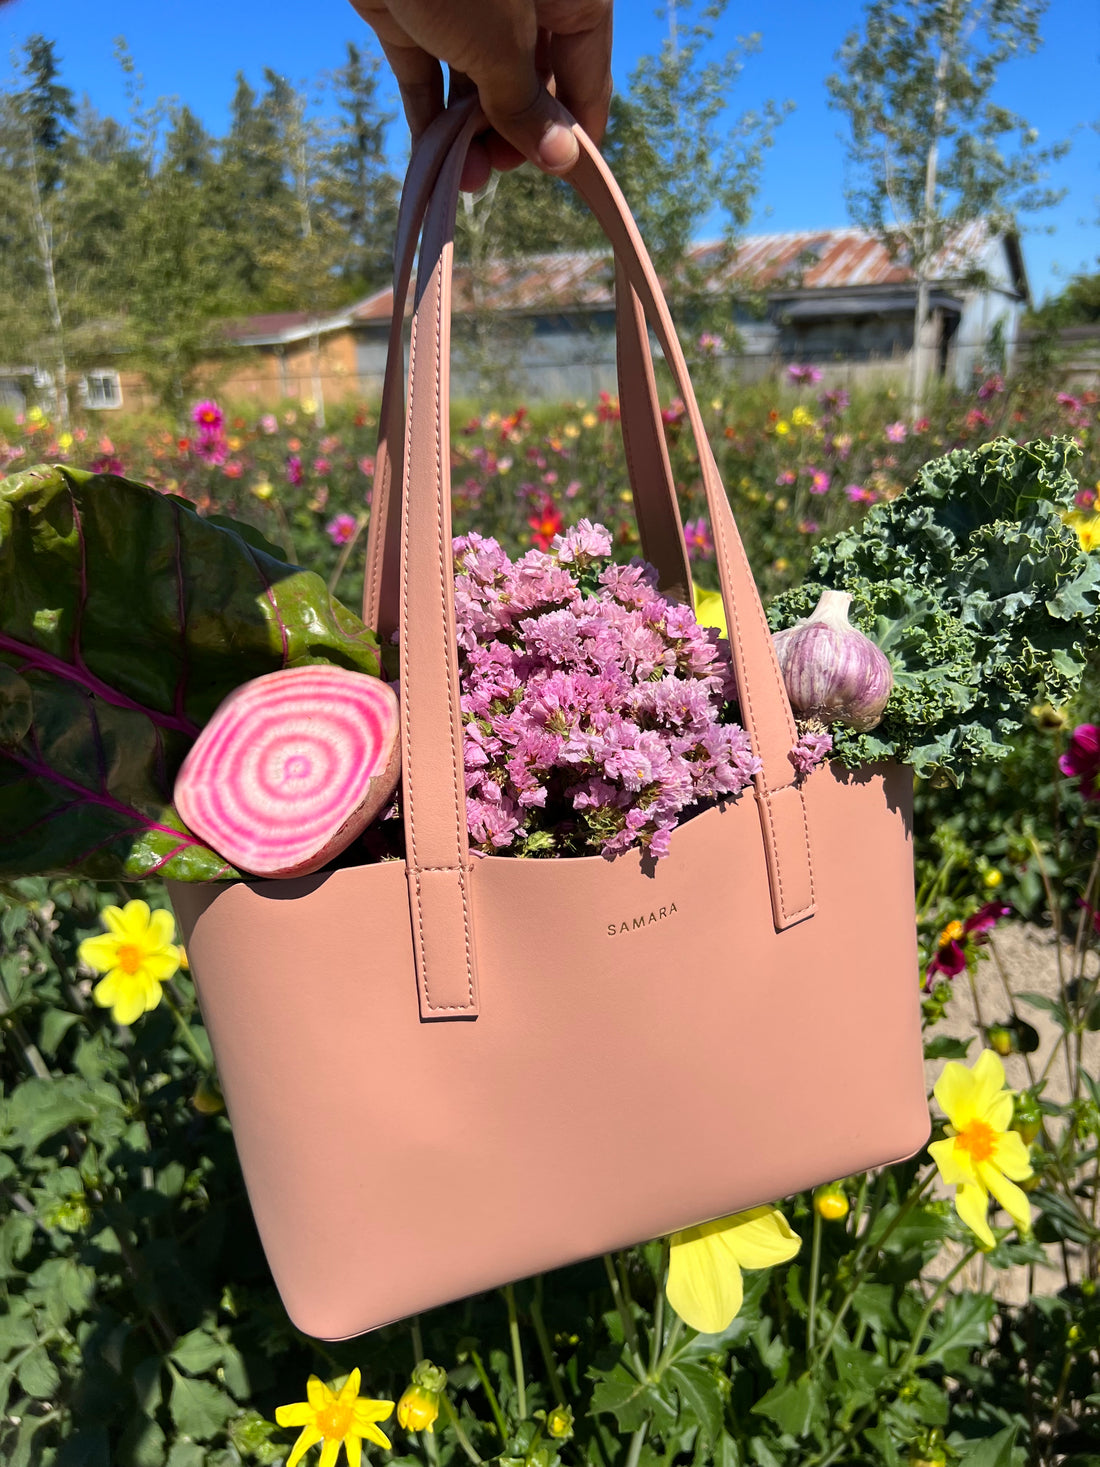 The Harvest Tote